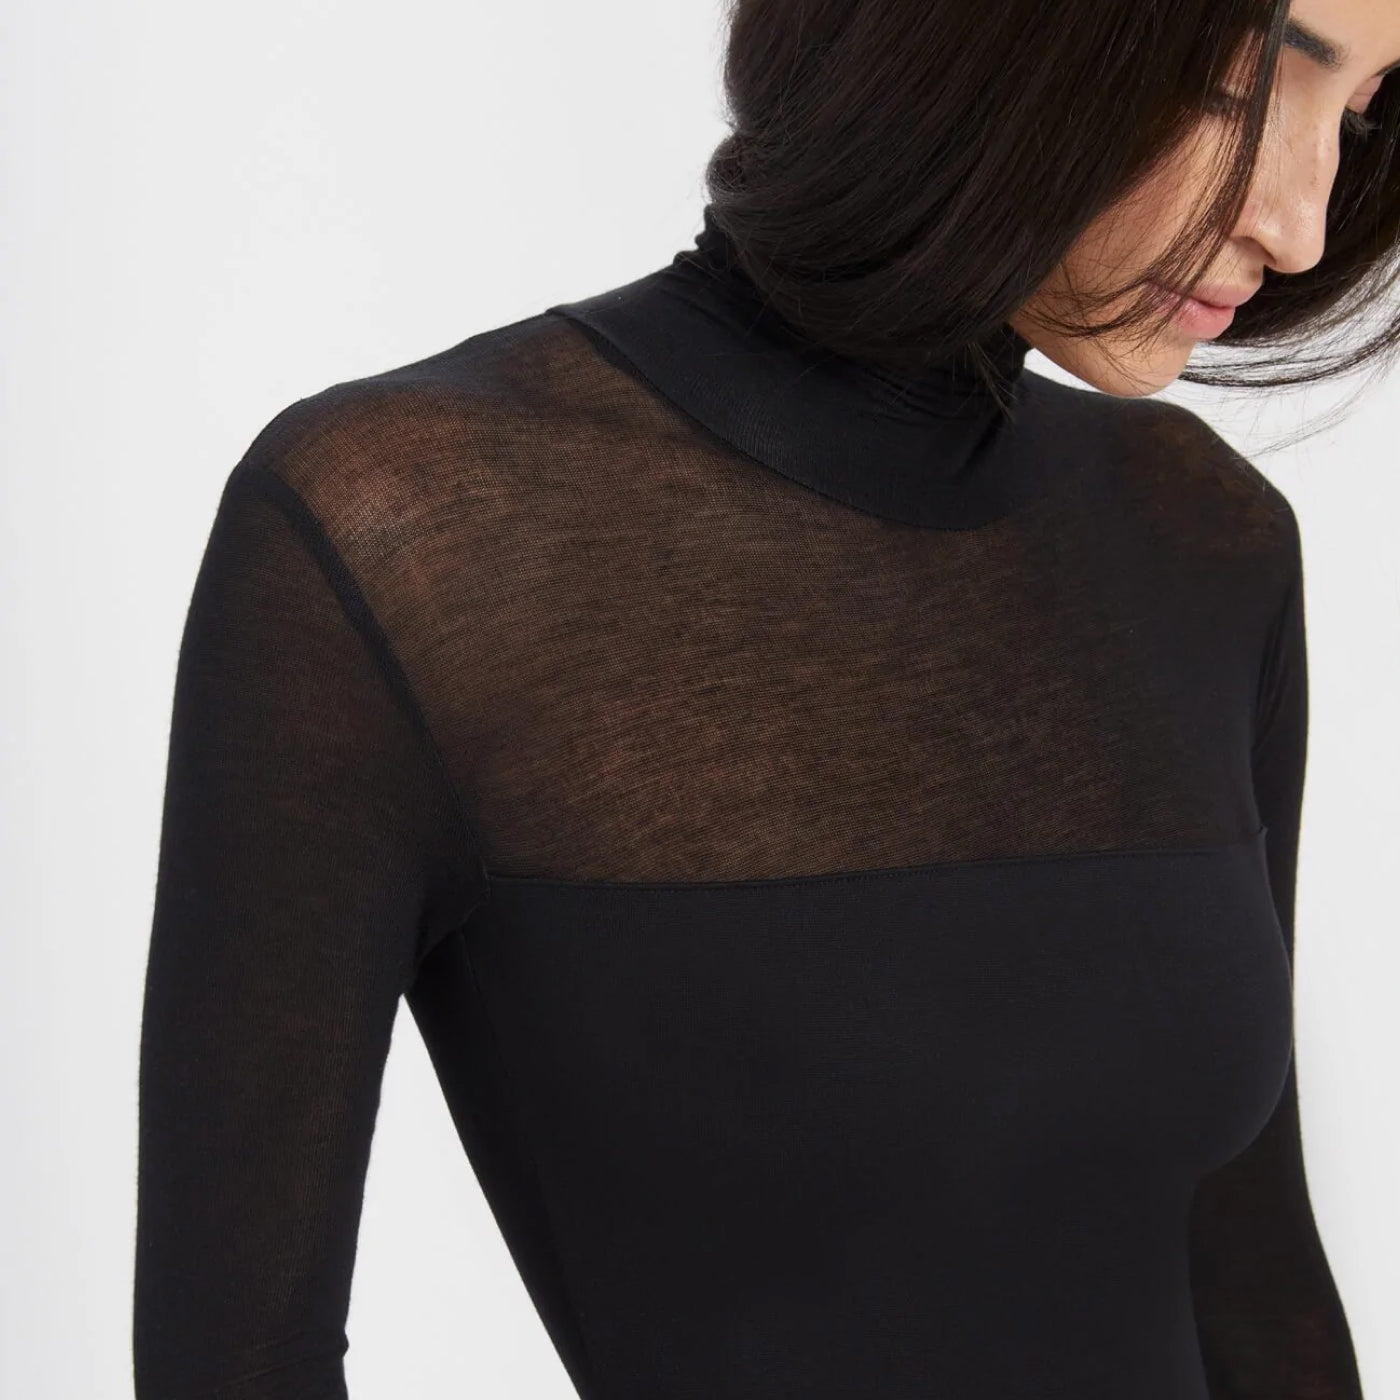 Five Ways To Style A Black Turtleneck | Marcella